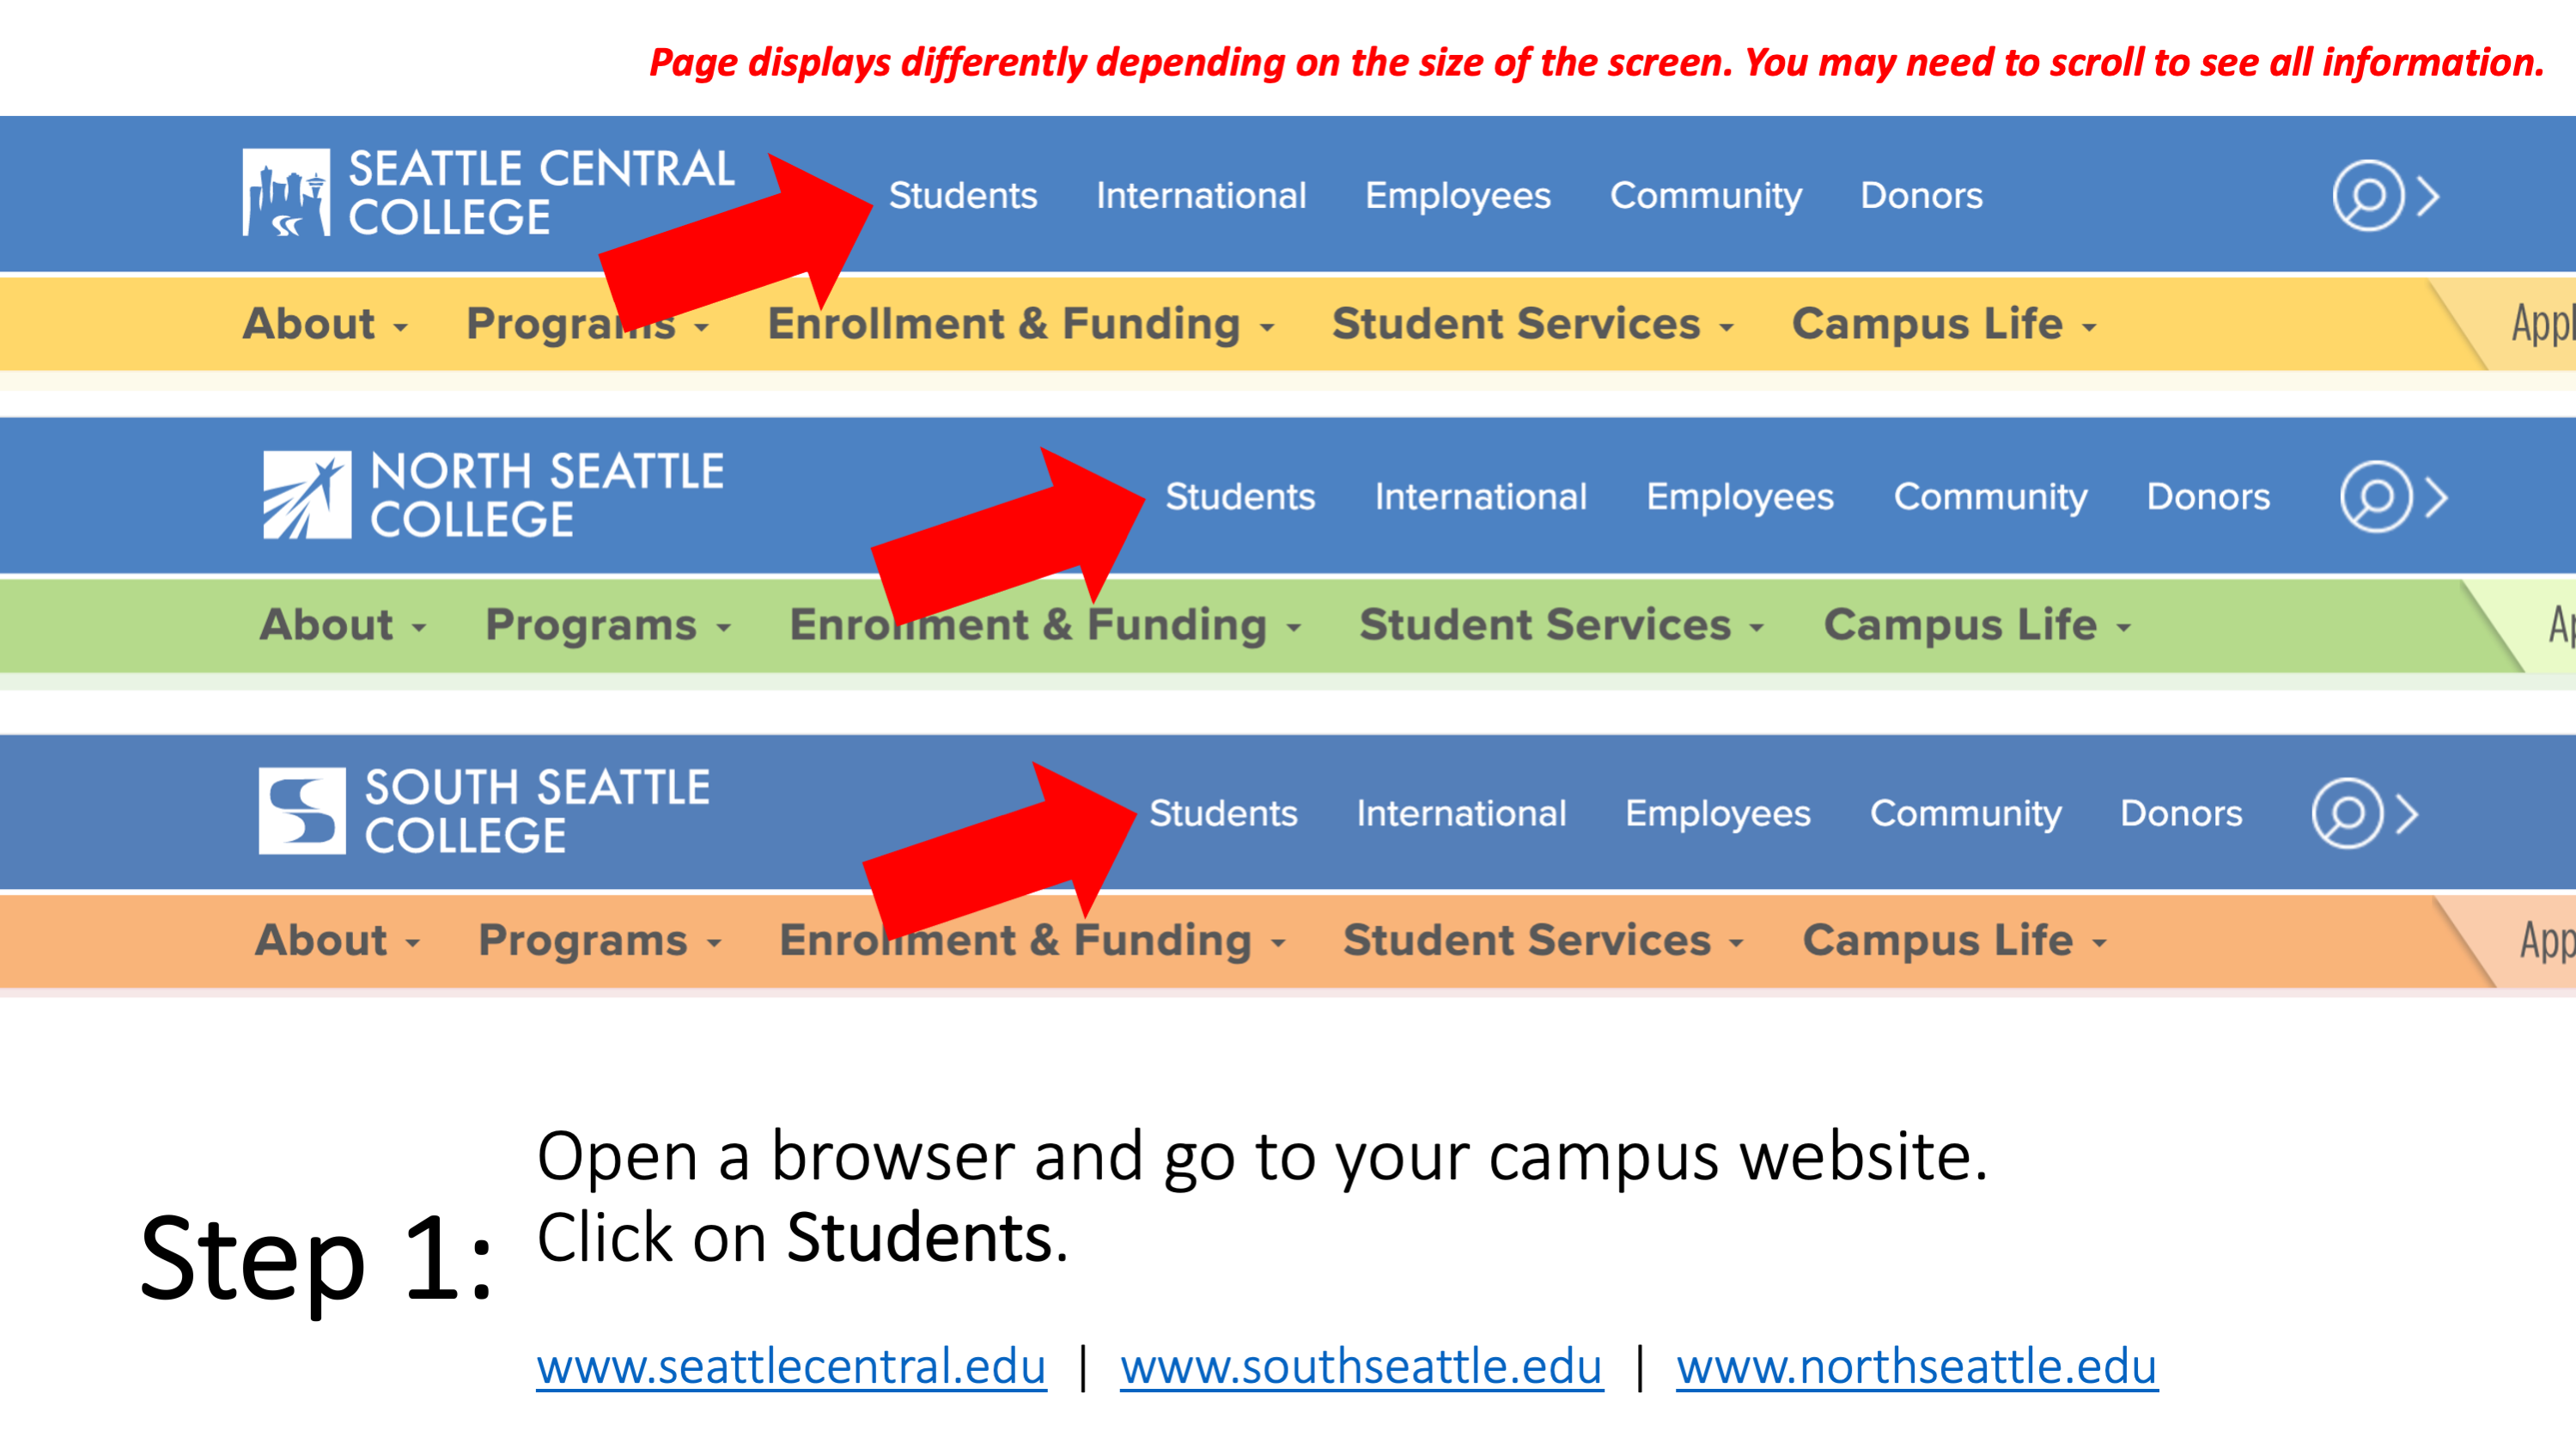 Step 1: Open a browser and go to your campus website. Click on Students. www.seattlecentral.edu , www.southseattle.edu , or www.northseattle.edu.